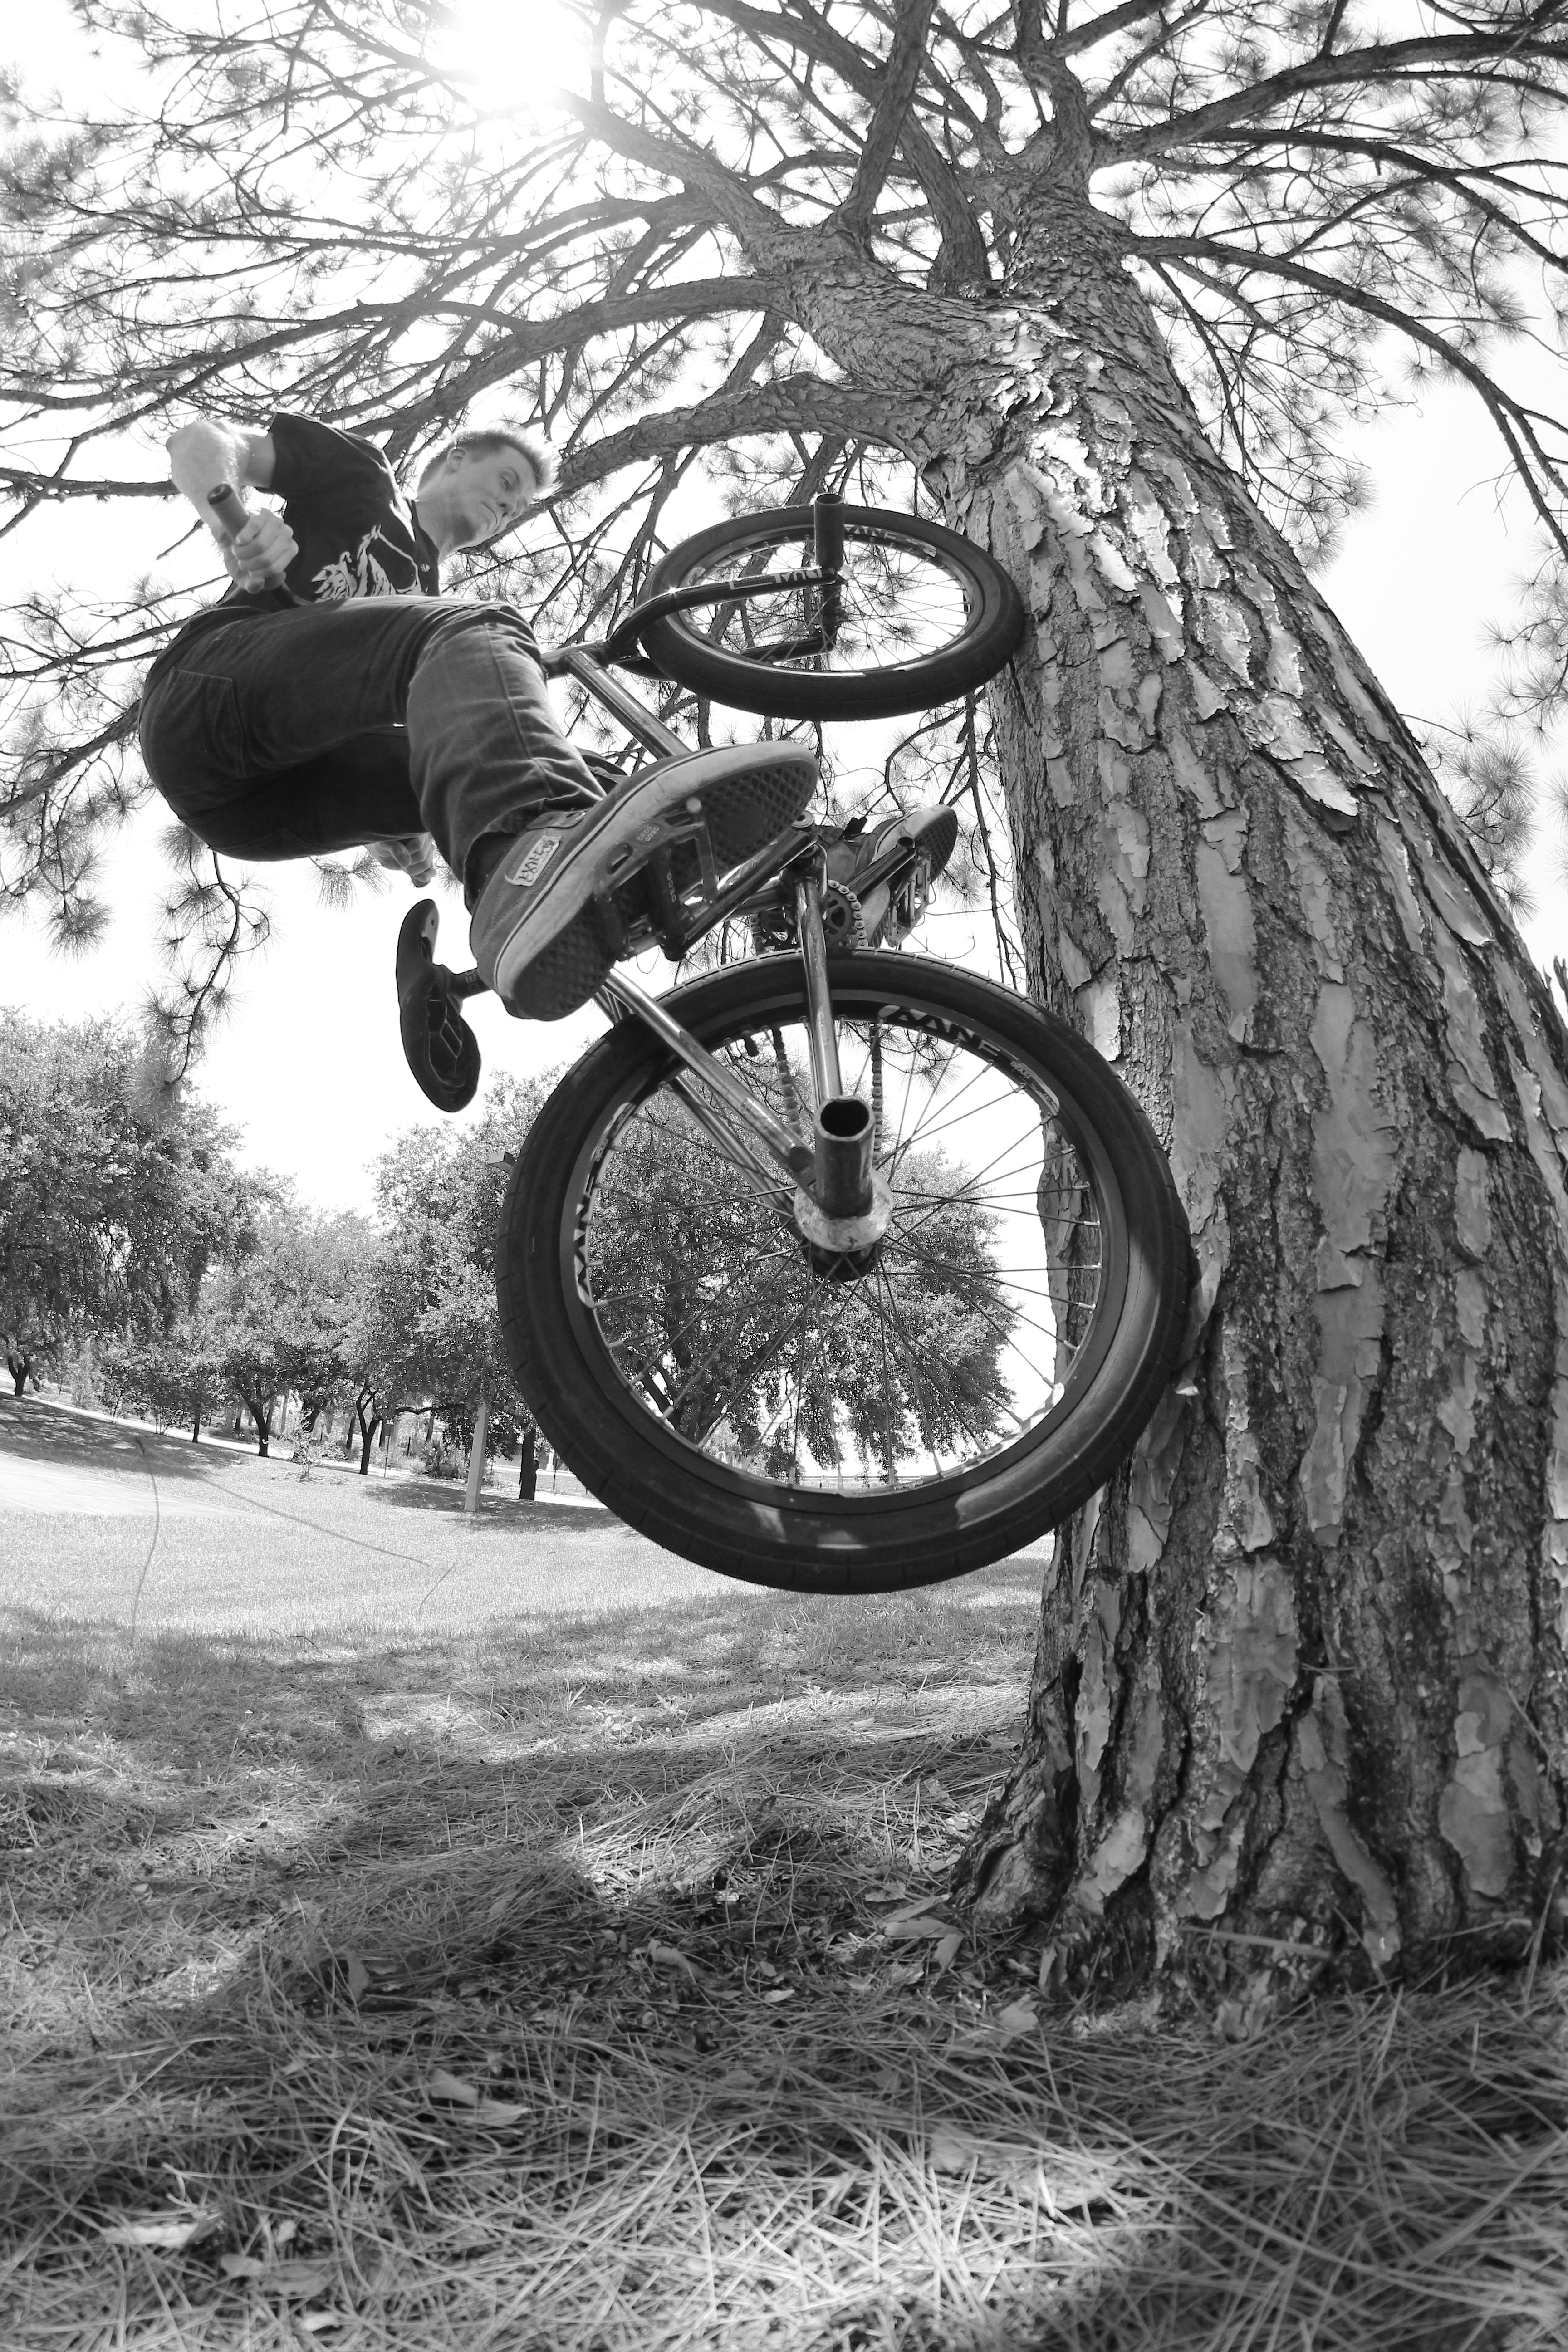 Scott Ehlert: Pine tree fakie amongst a terrible roll up and roll out.